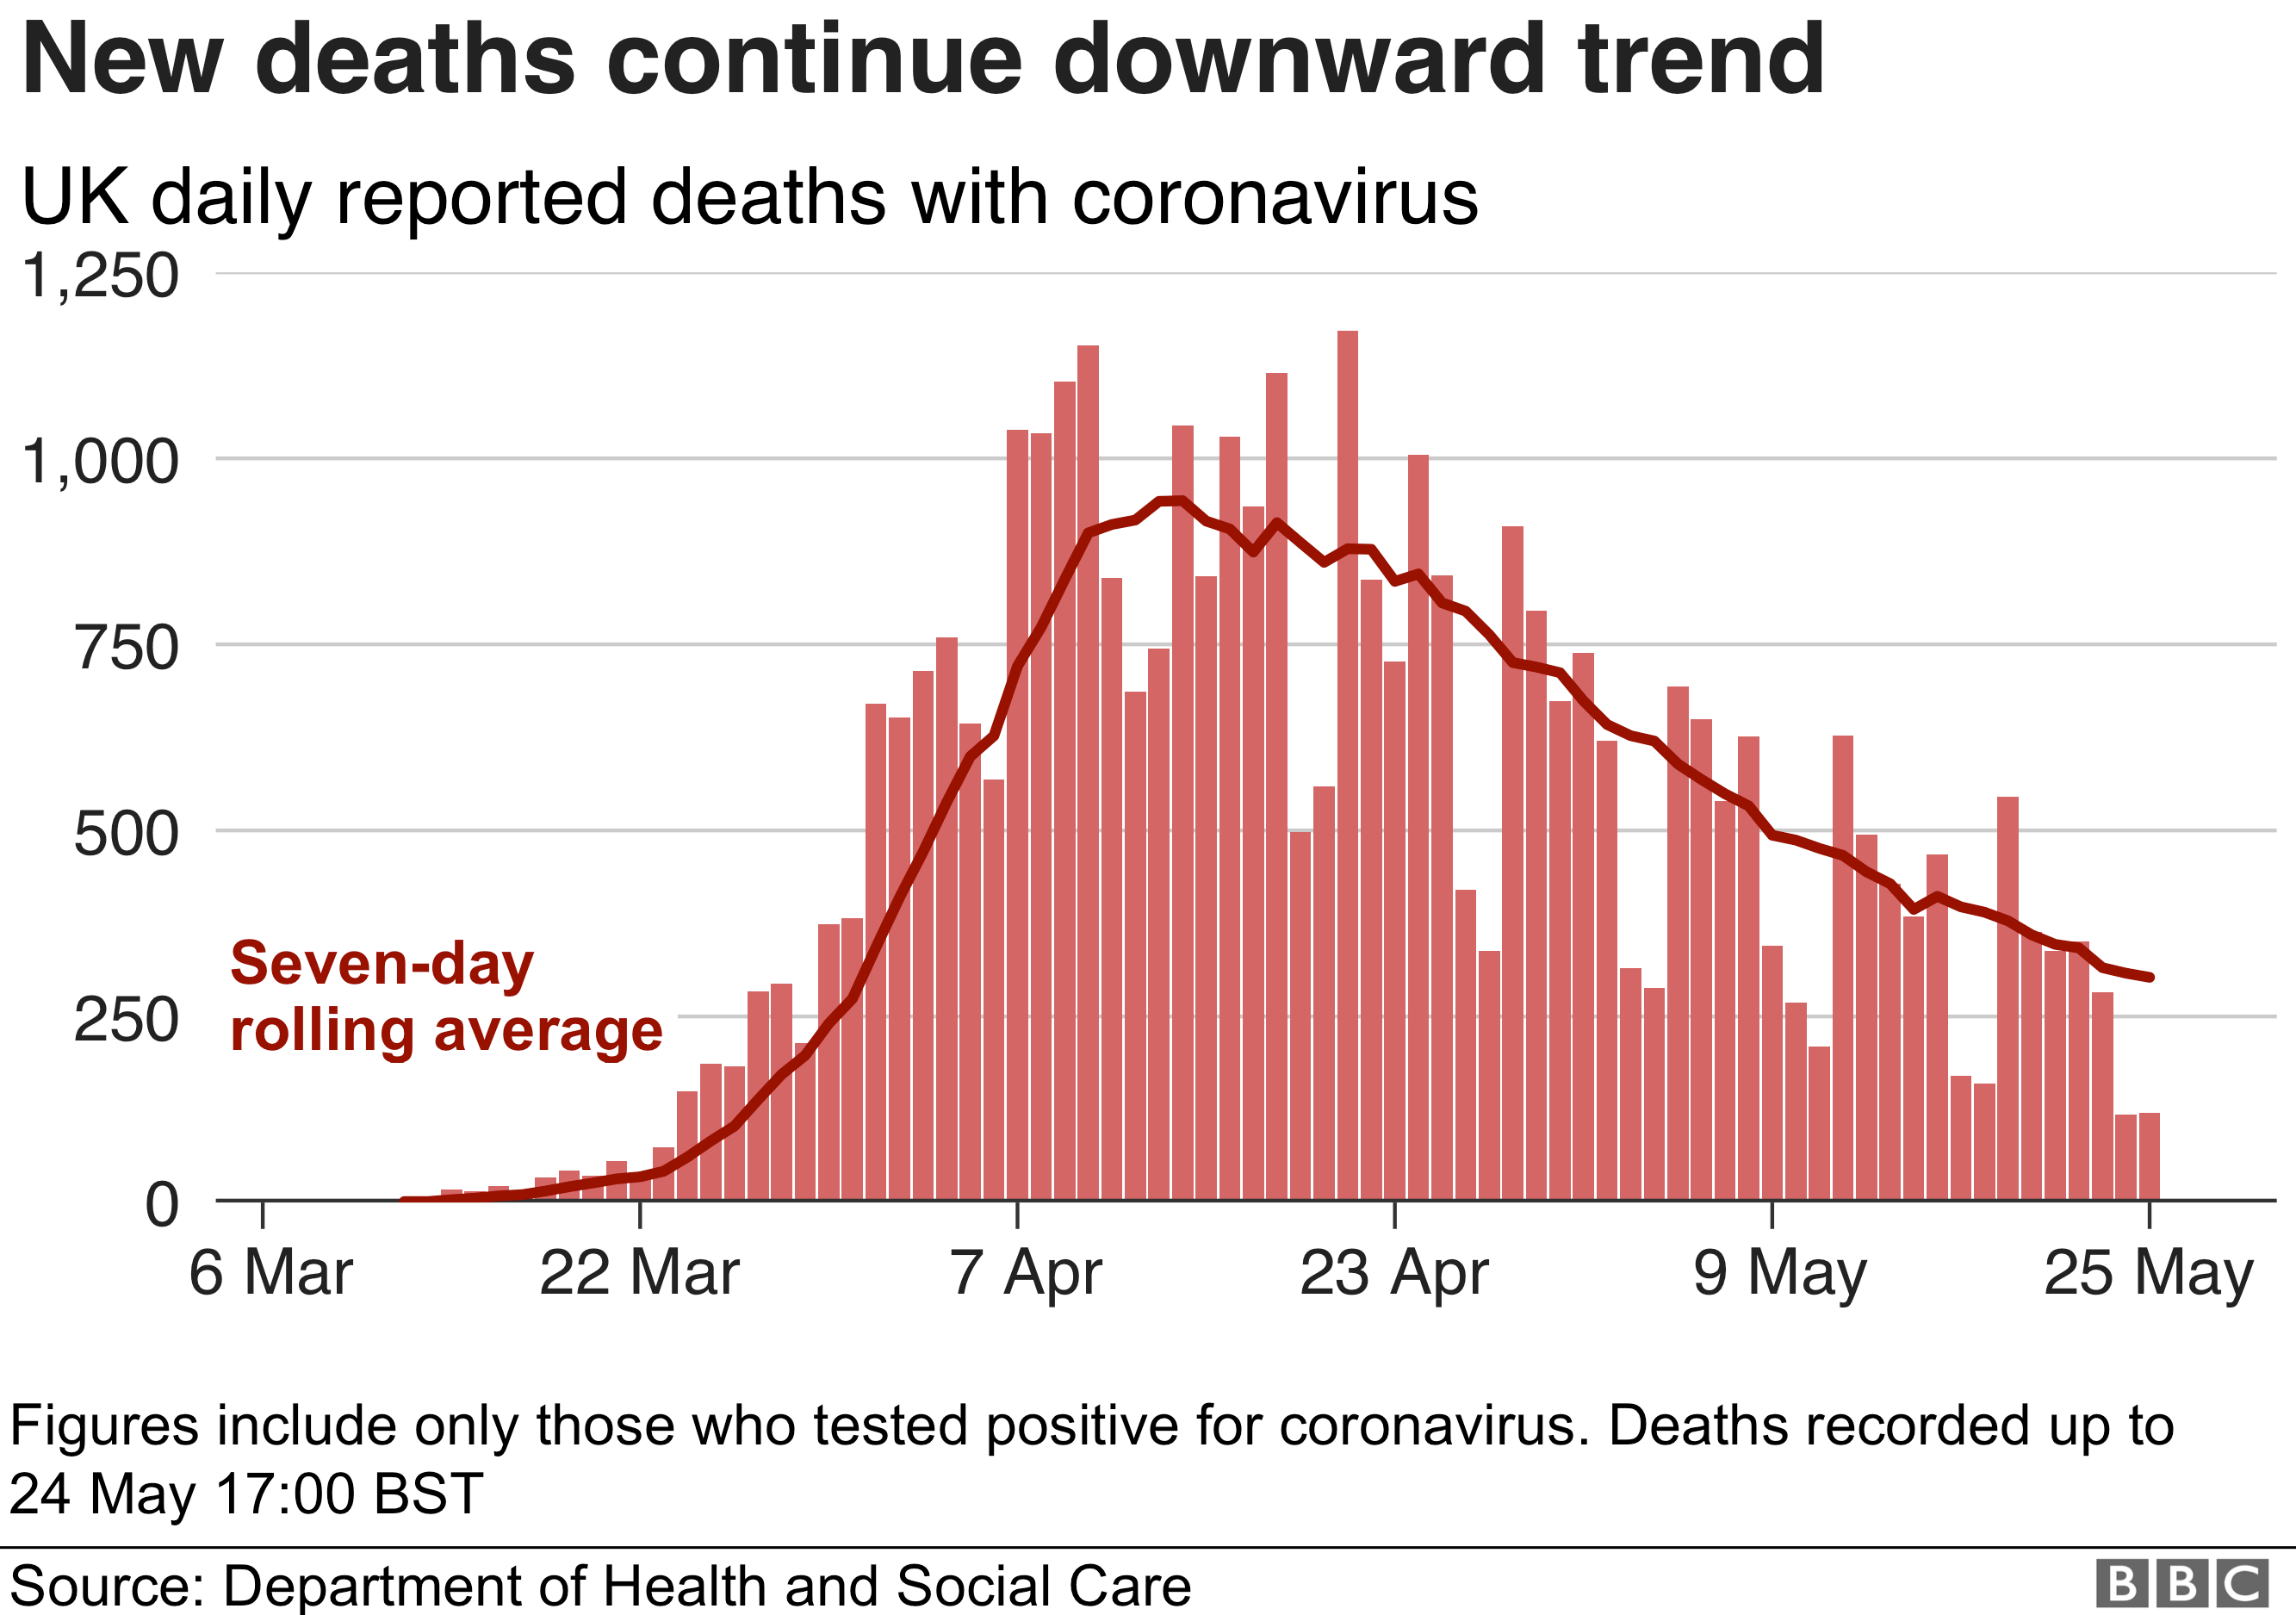 Chart showing new deaths continuing a downward trend, 25 May